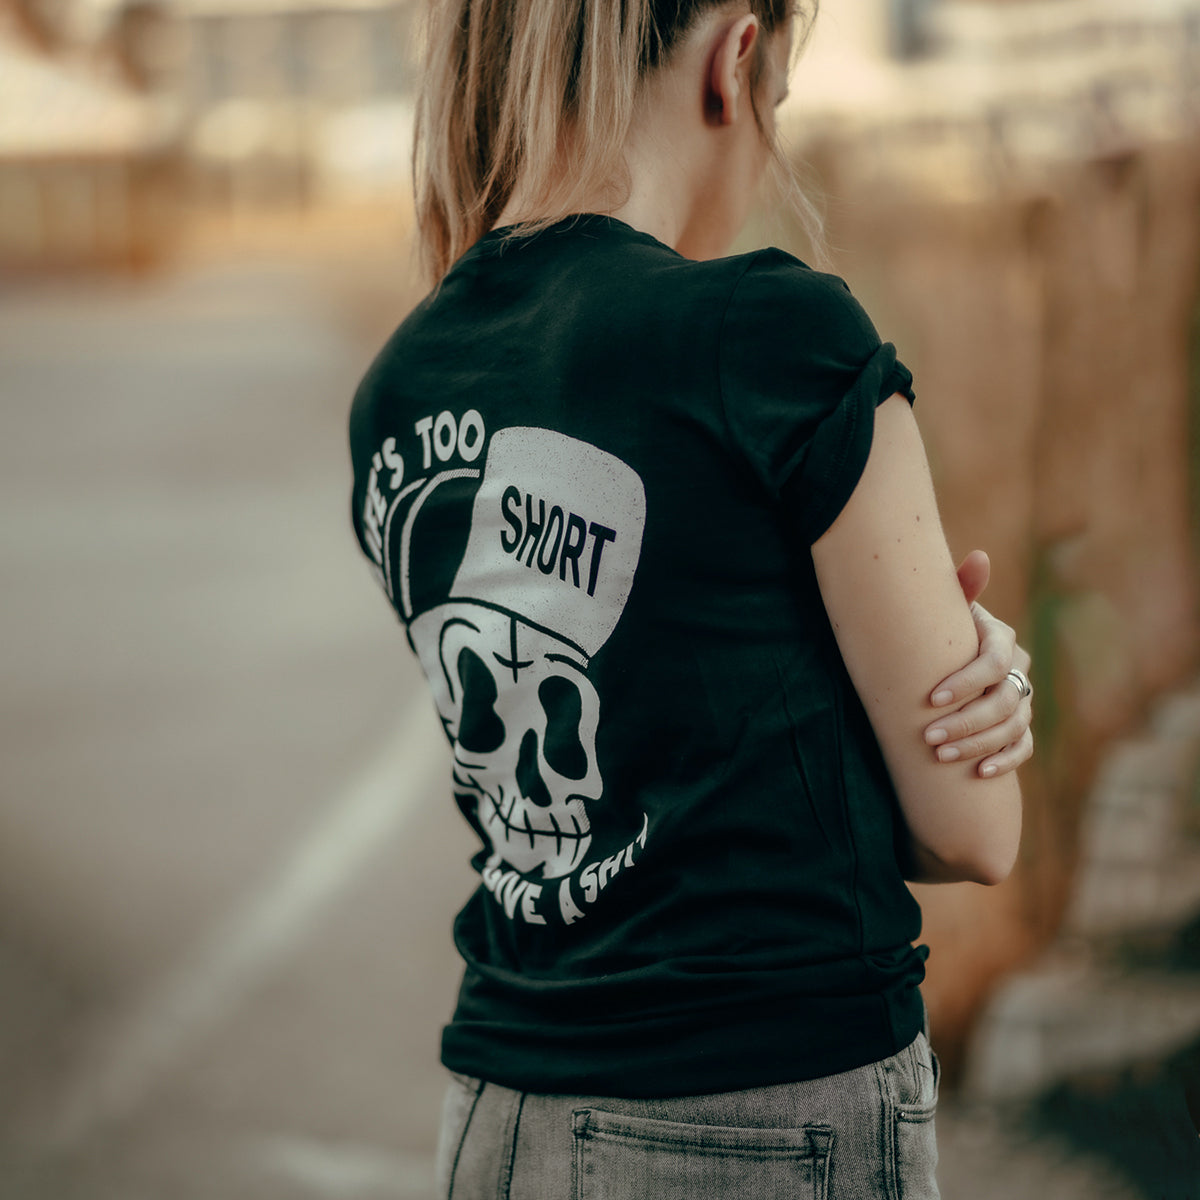 Uprandy Lifes Too Short To Give A Shit Skull Printed Women T-Shirt - chicyea